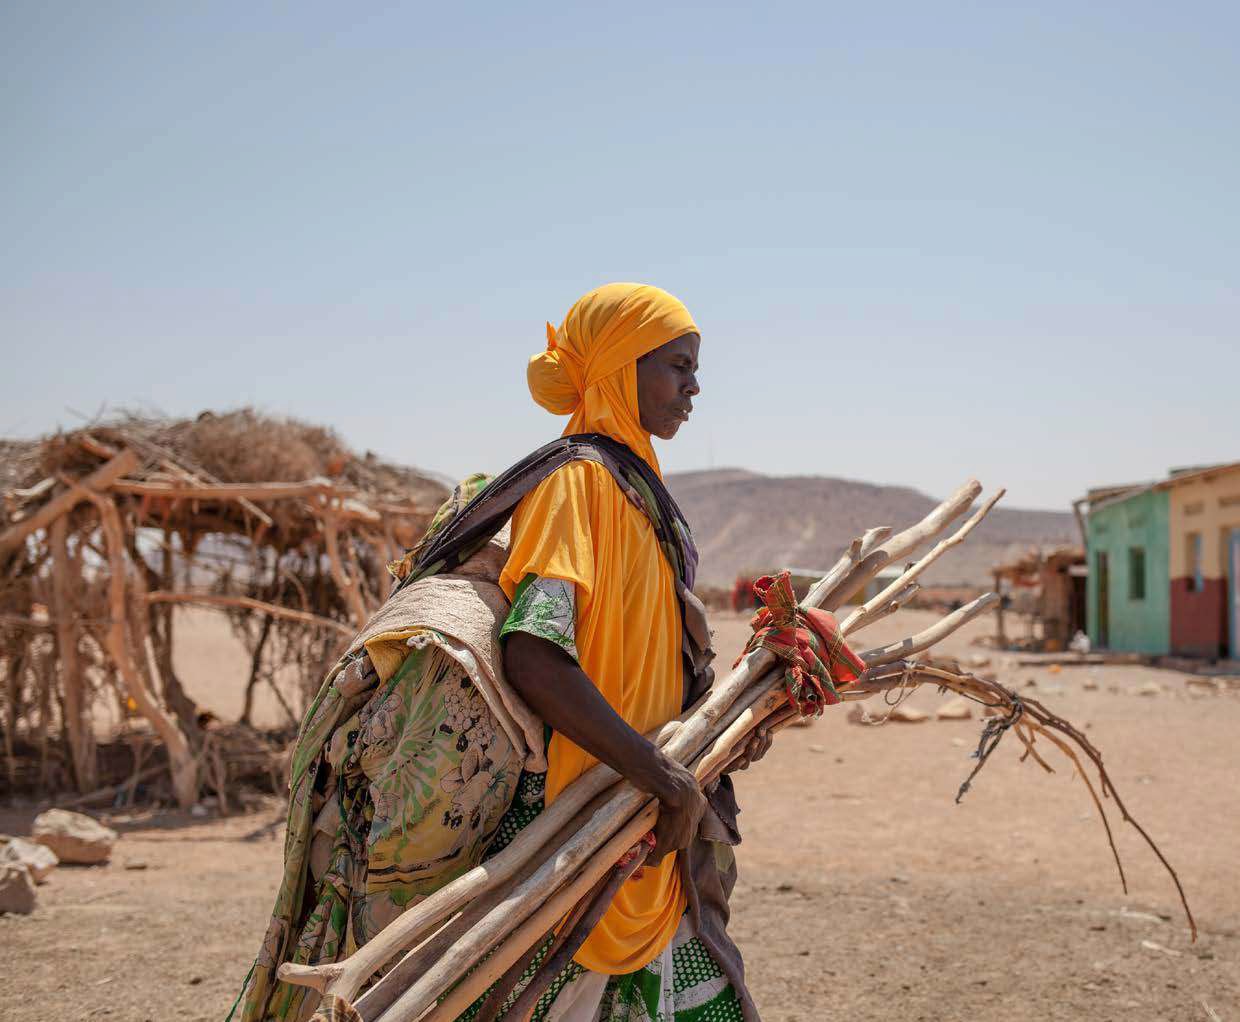 This Somali woman is carrying the wood, fabric and cords necessary to build her tent after fleeing drought. She walked four hours, crossing the mountains bordering the dry valley. Of her 200 sheep, nothing is left. Sick from the lack of food, her husband is now in hospital, leaving her alone to care for their five children.